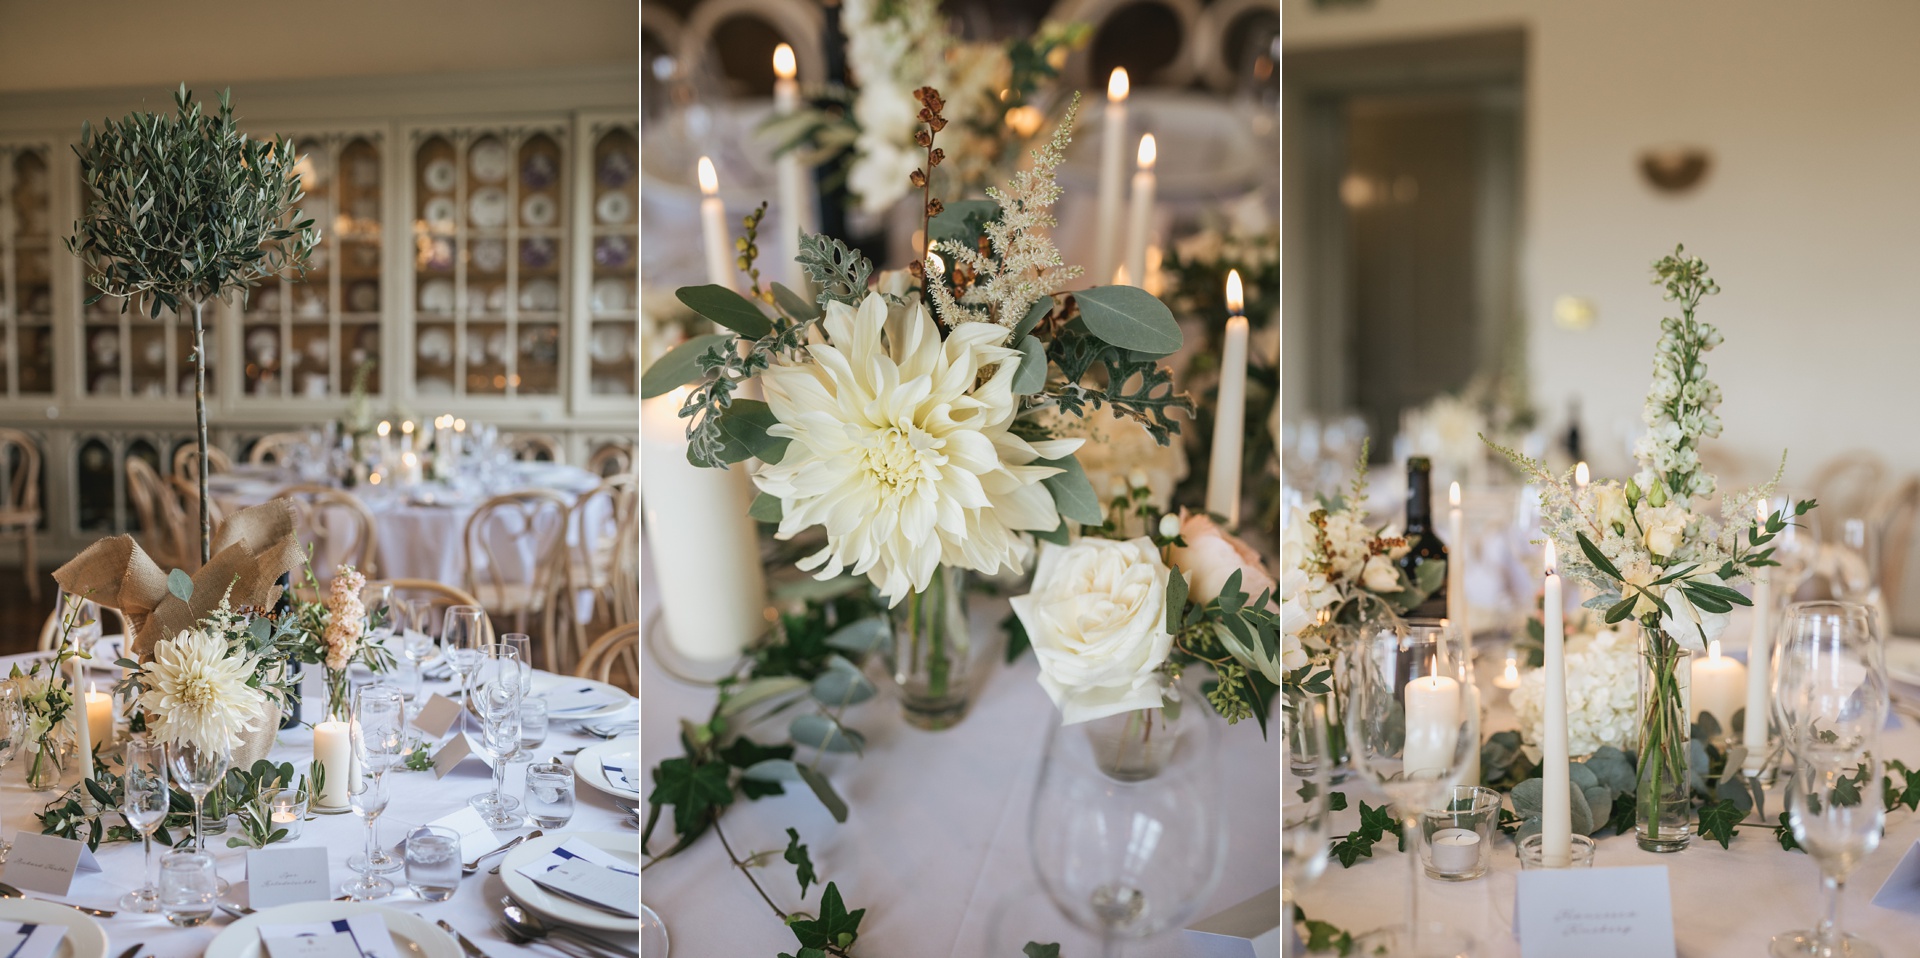 Beautiful floral table arrangements with huge white peonies